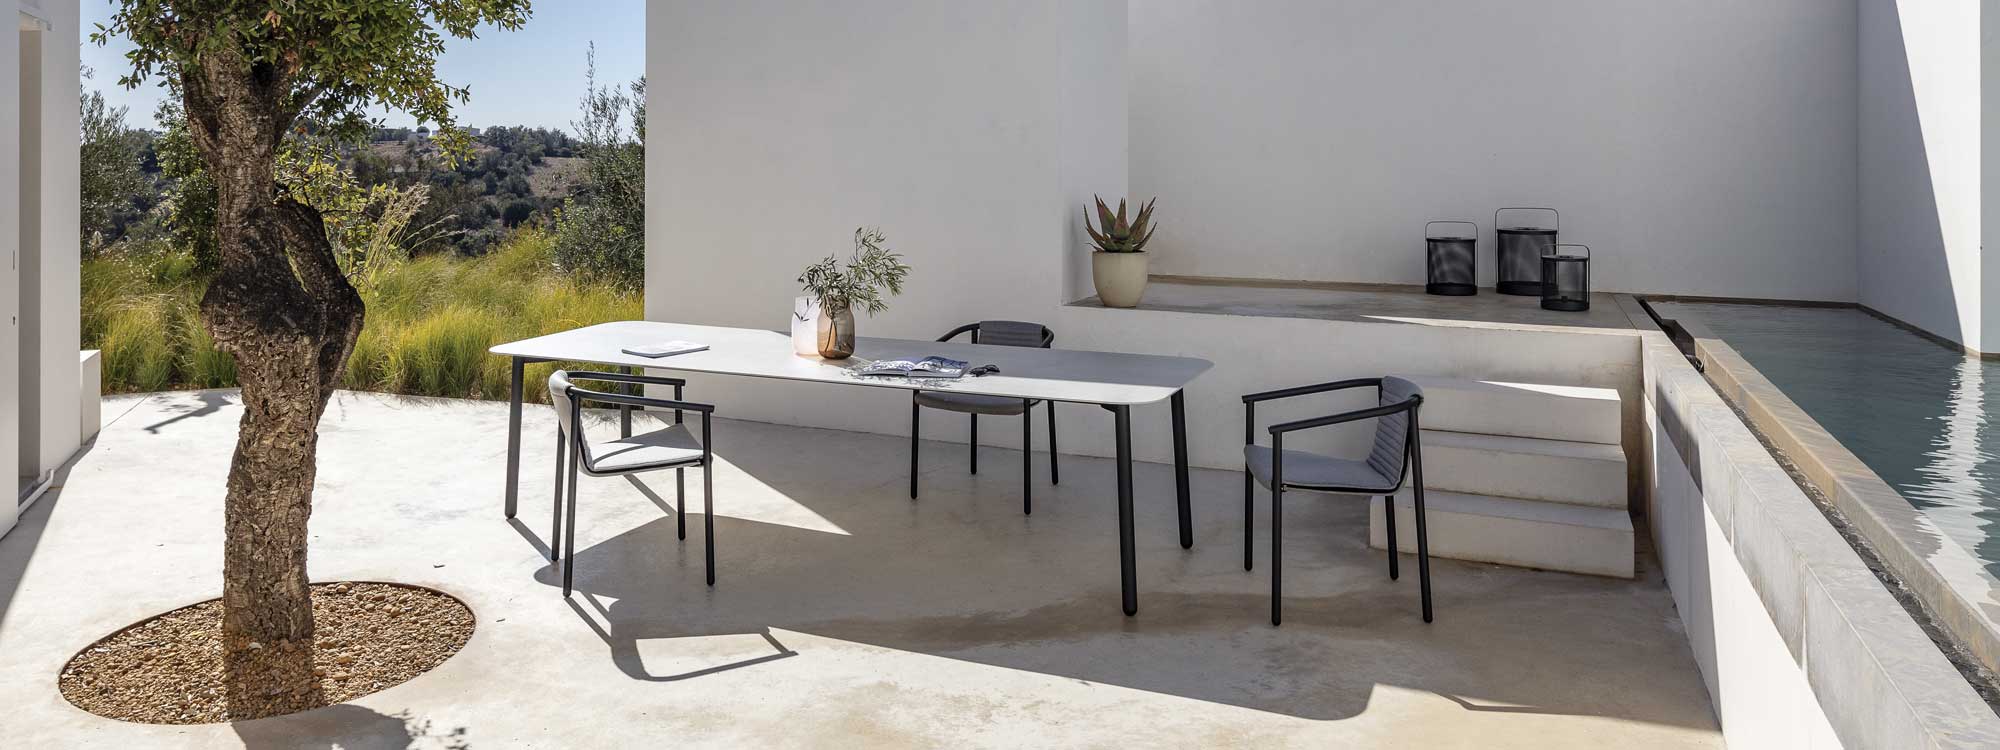 Duct Round garden chair with Starling exterior dining table on minimalist poured concrete terrace